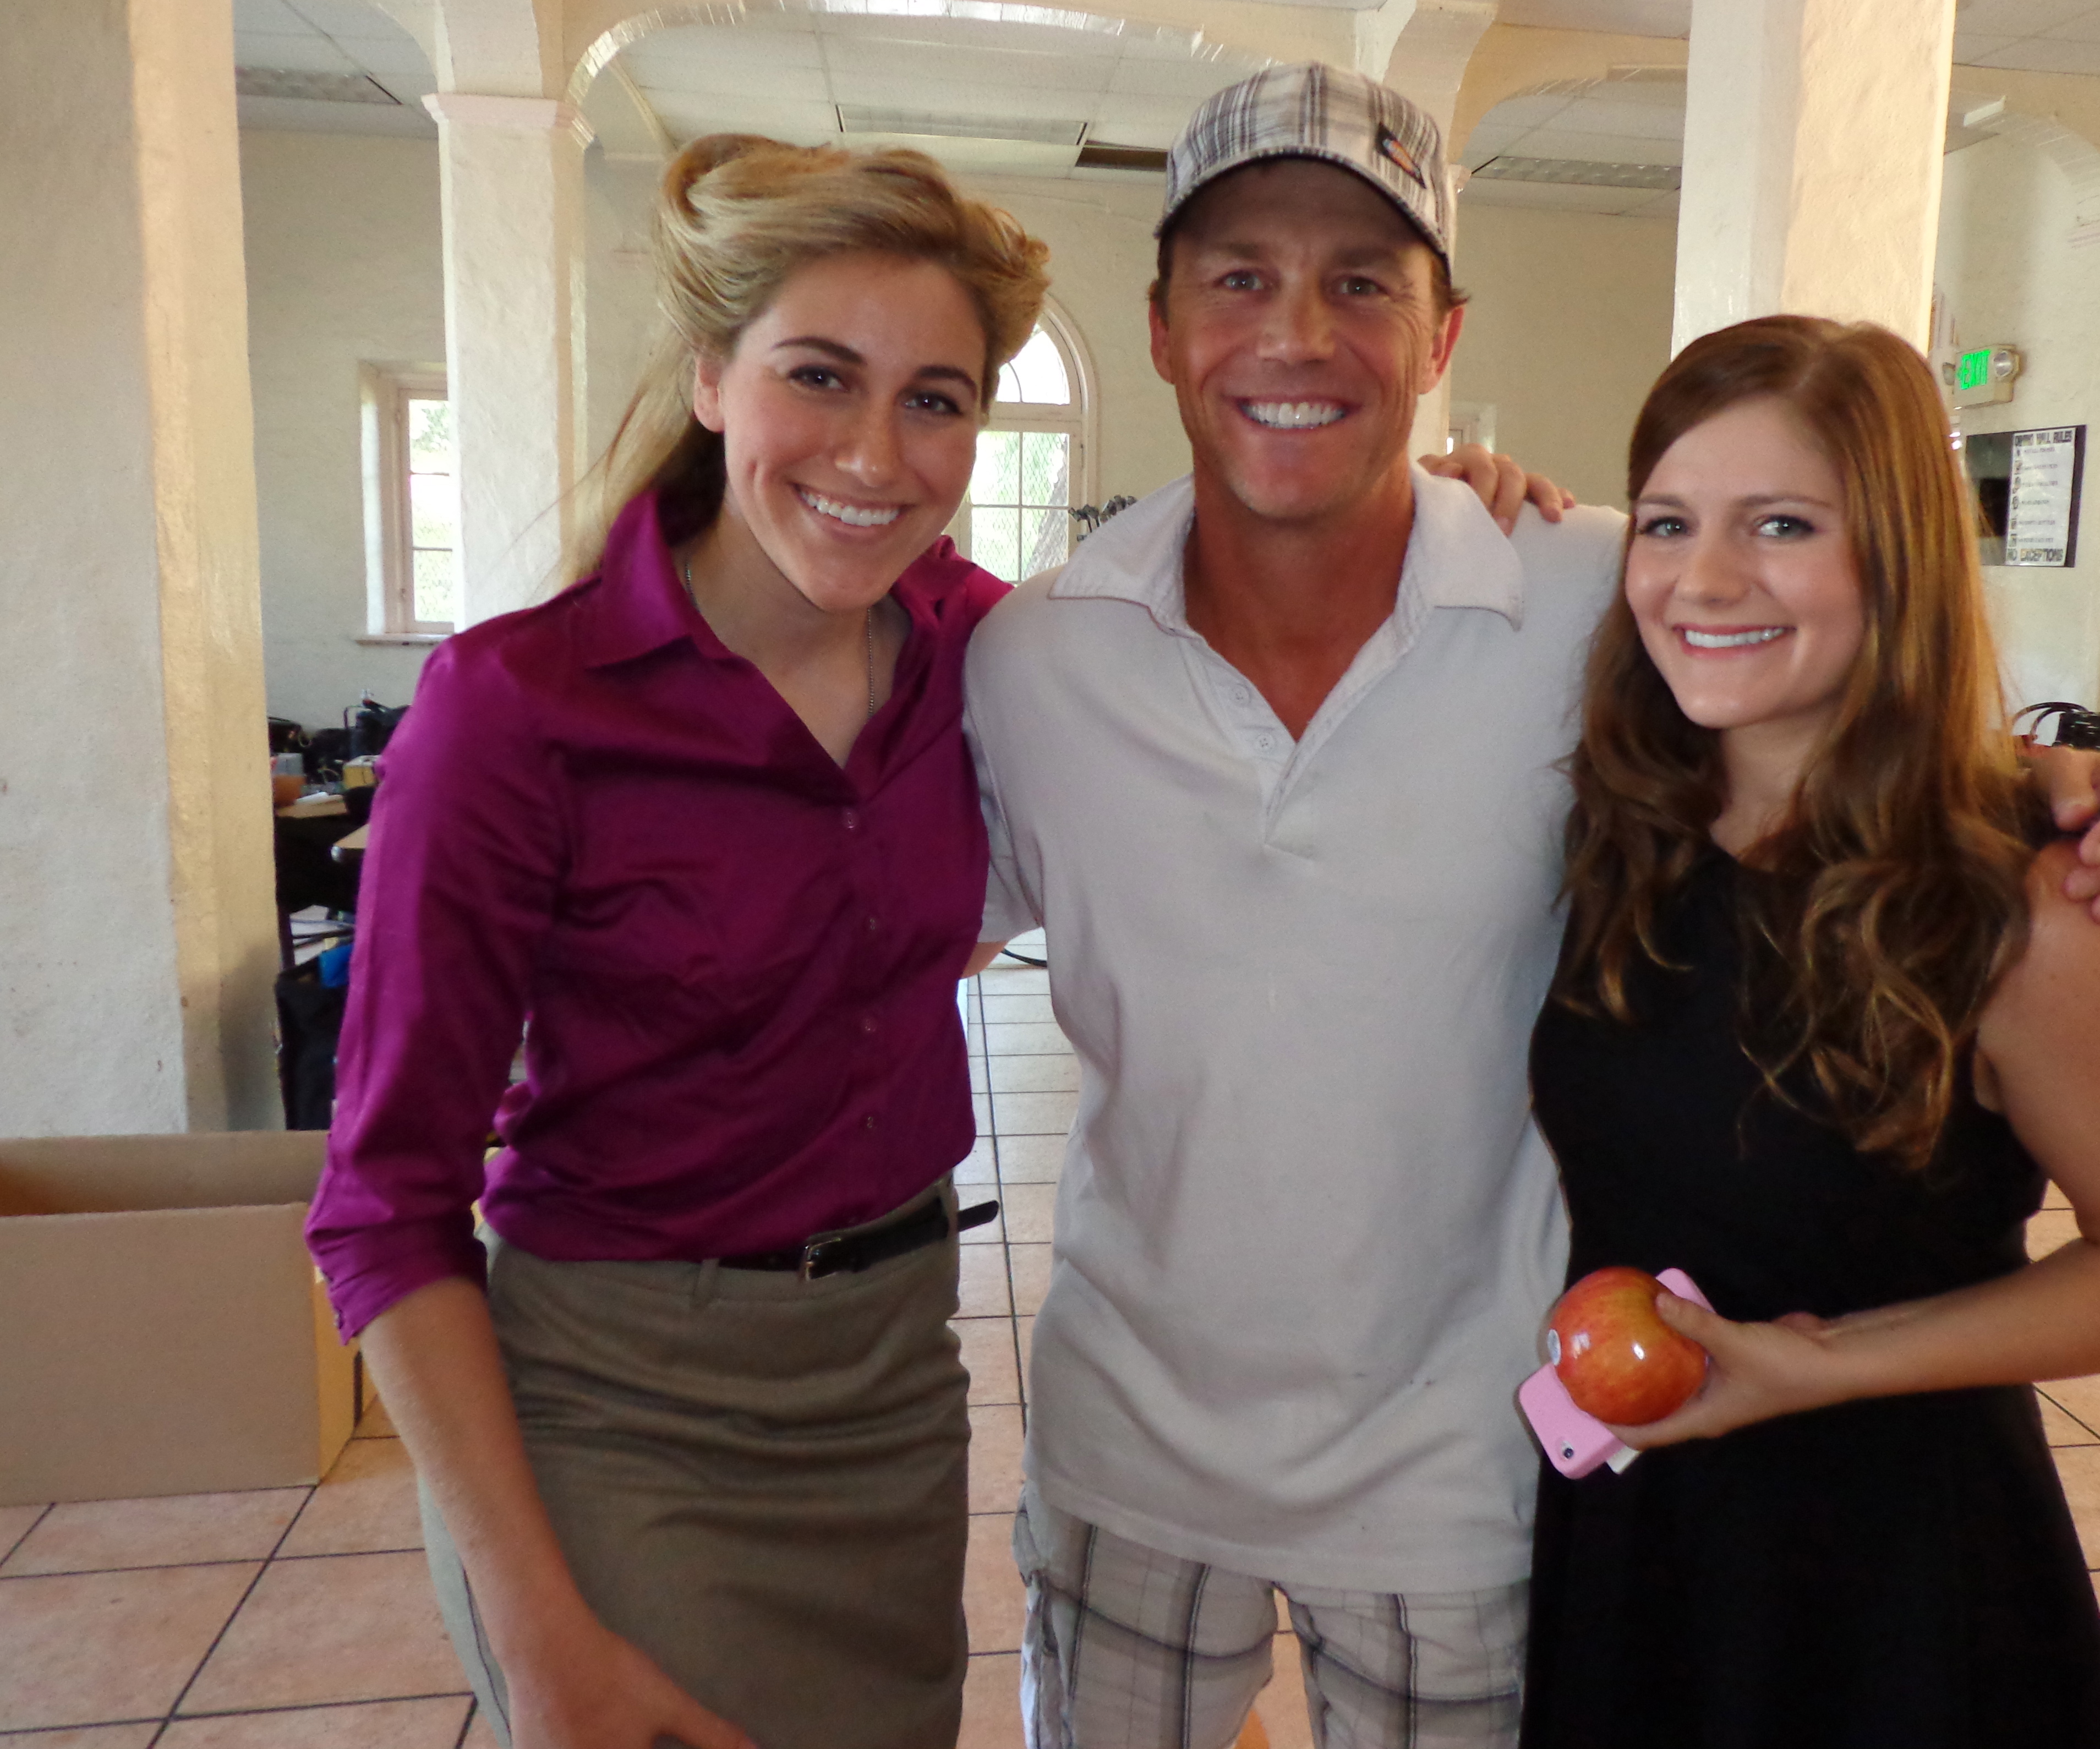 Brian Krause and Kate St. Clair on the set of The Studio Club